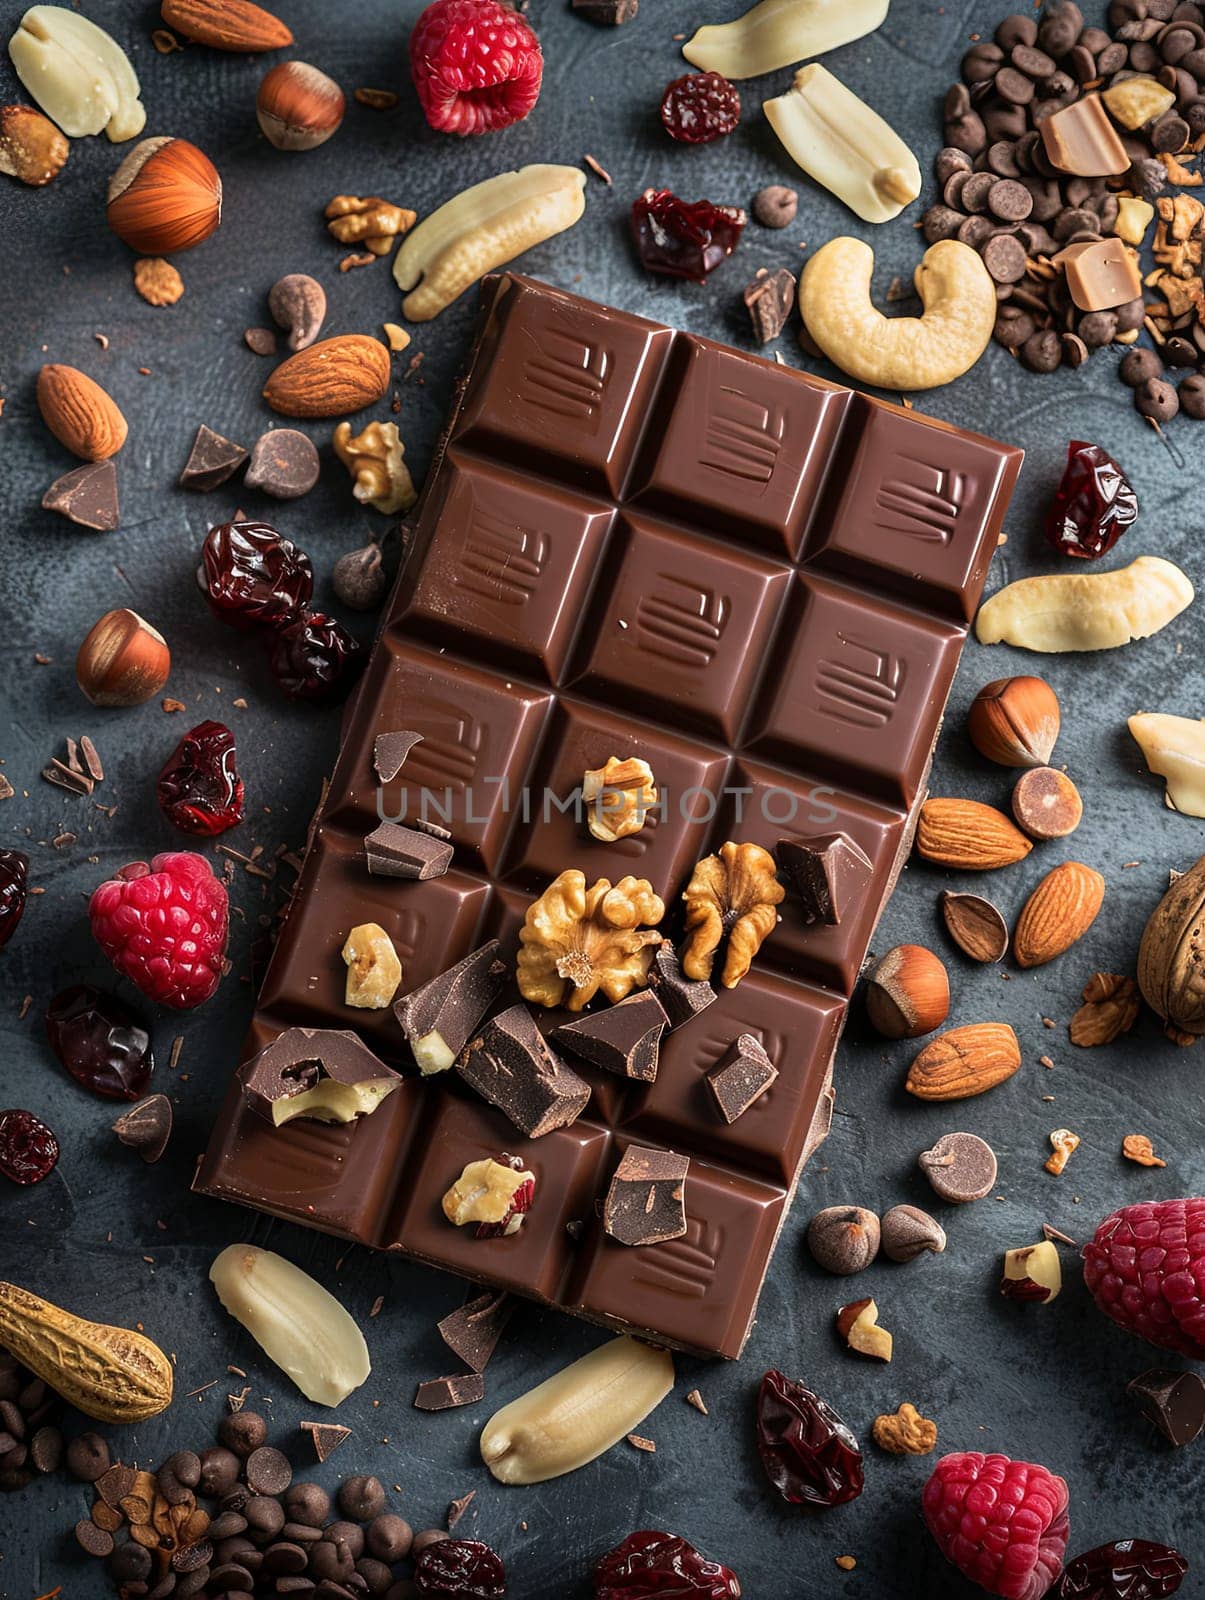 Rich chocolate bar with a variety of nuts, raspberries, and almonds on a textured surface.